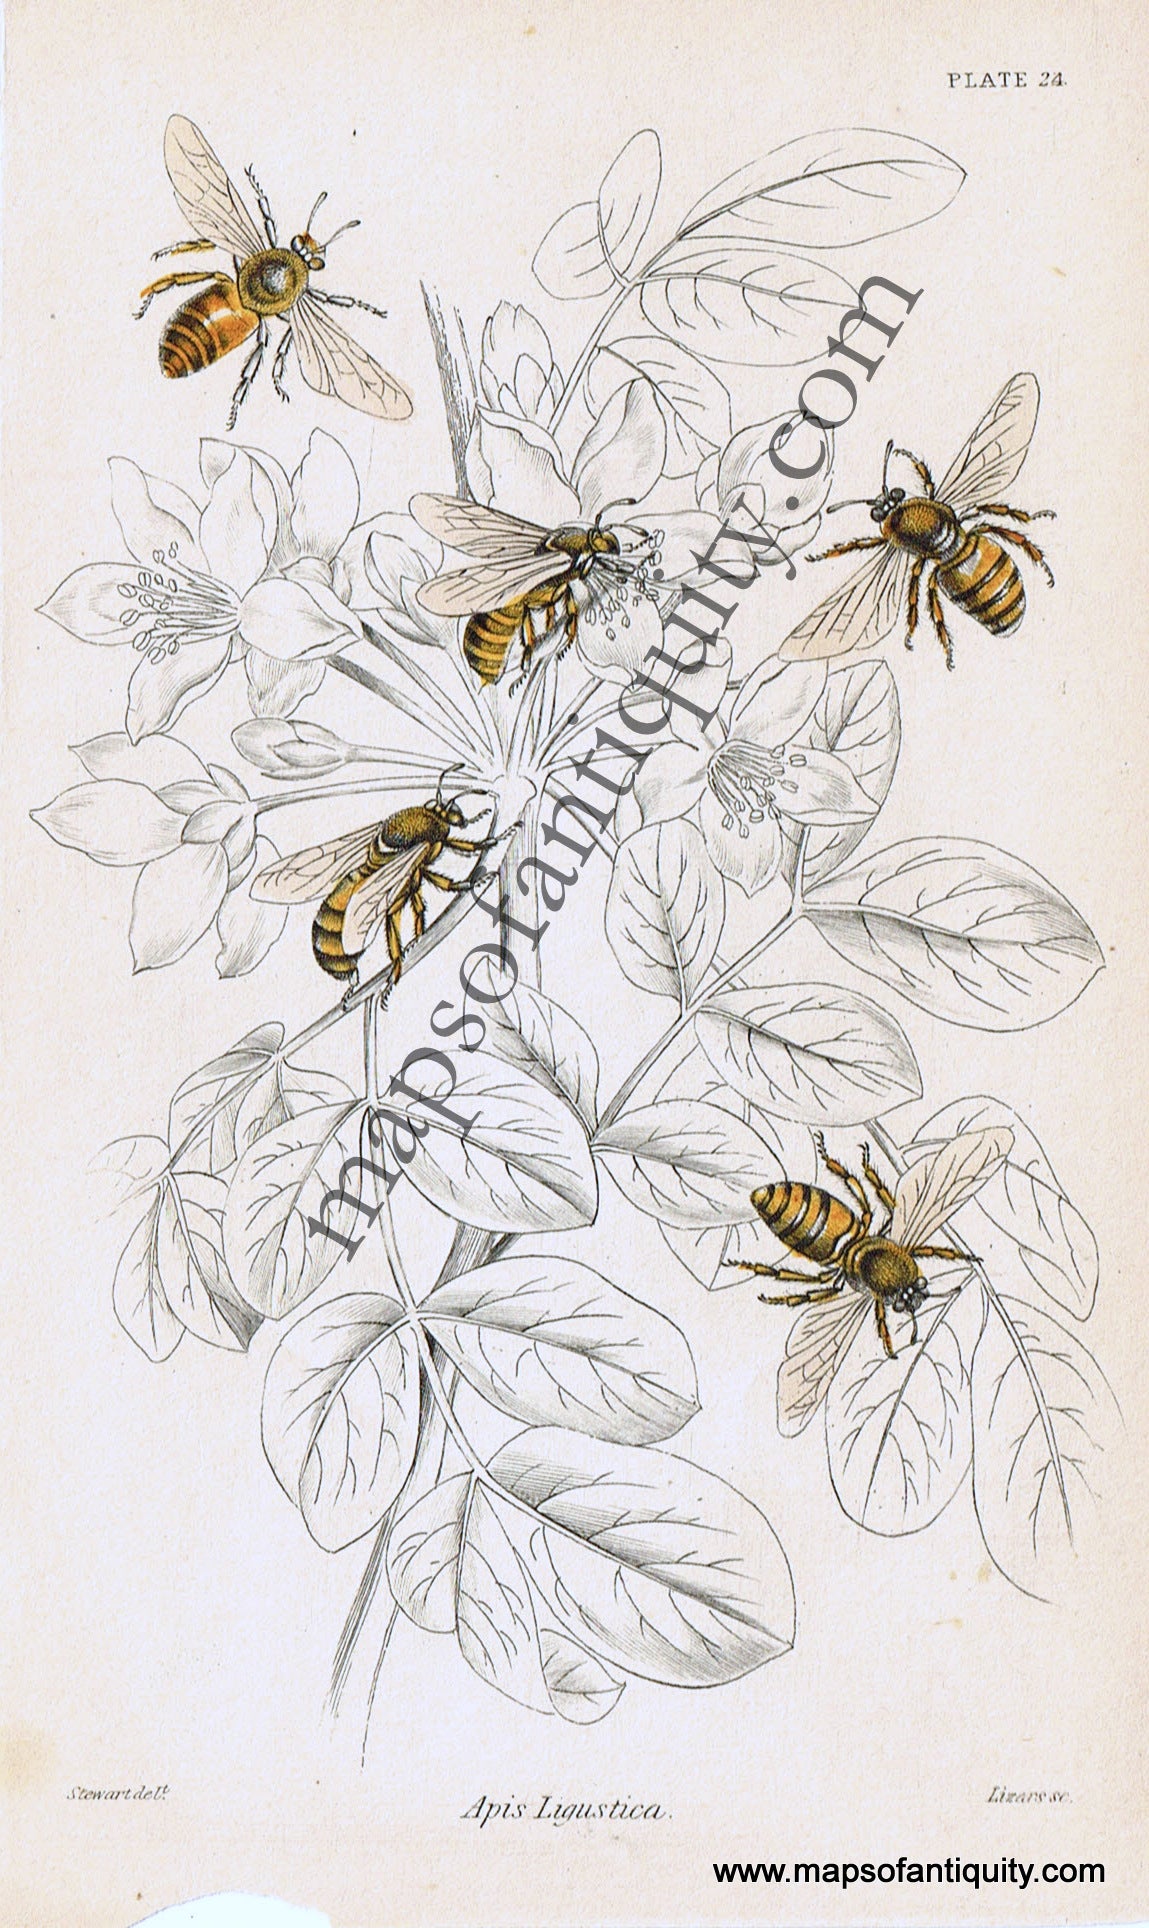 Antique-Hand-Colored-Print-Apis-ligustica-Antique-Prints-Natural-History-Insects-1840-Duncan-Maps-Of-Antiquity